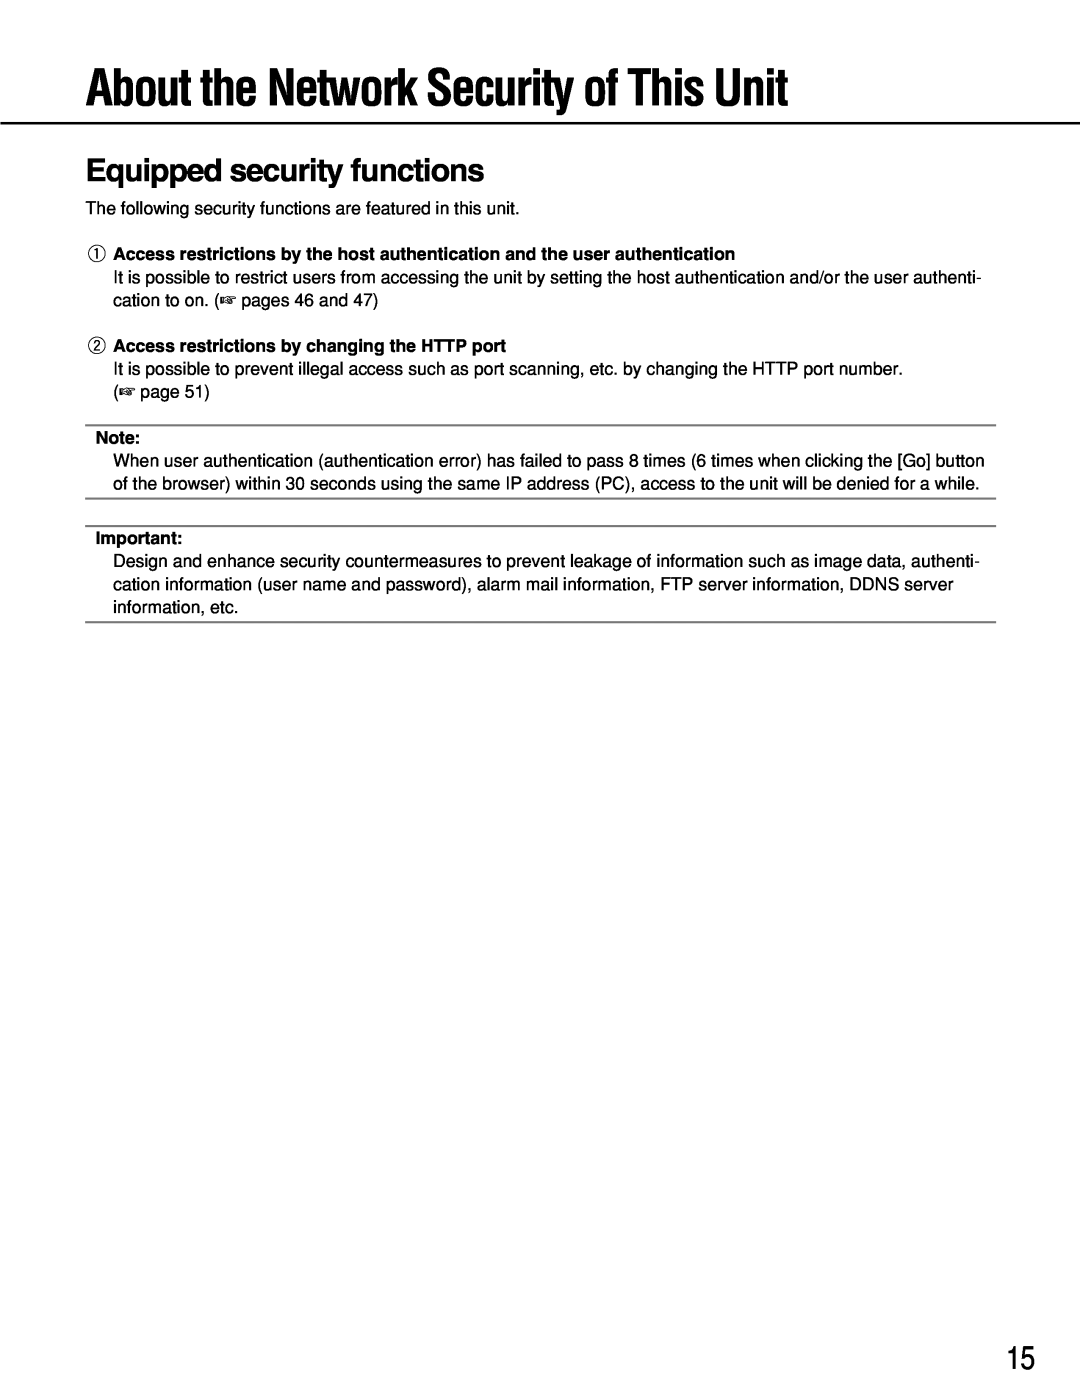 Panasonic WJ-NT314 manual About the Network Security of This Unit, Equipped security functions 